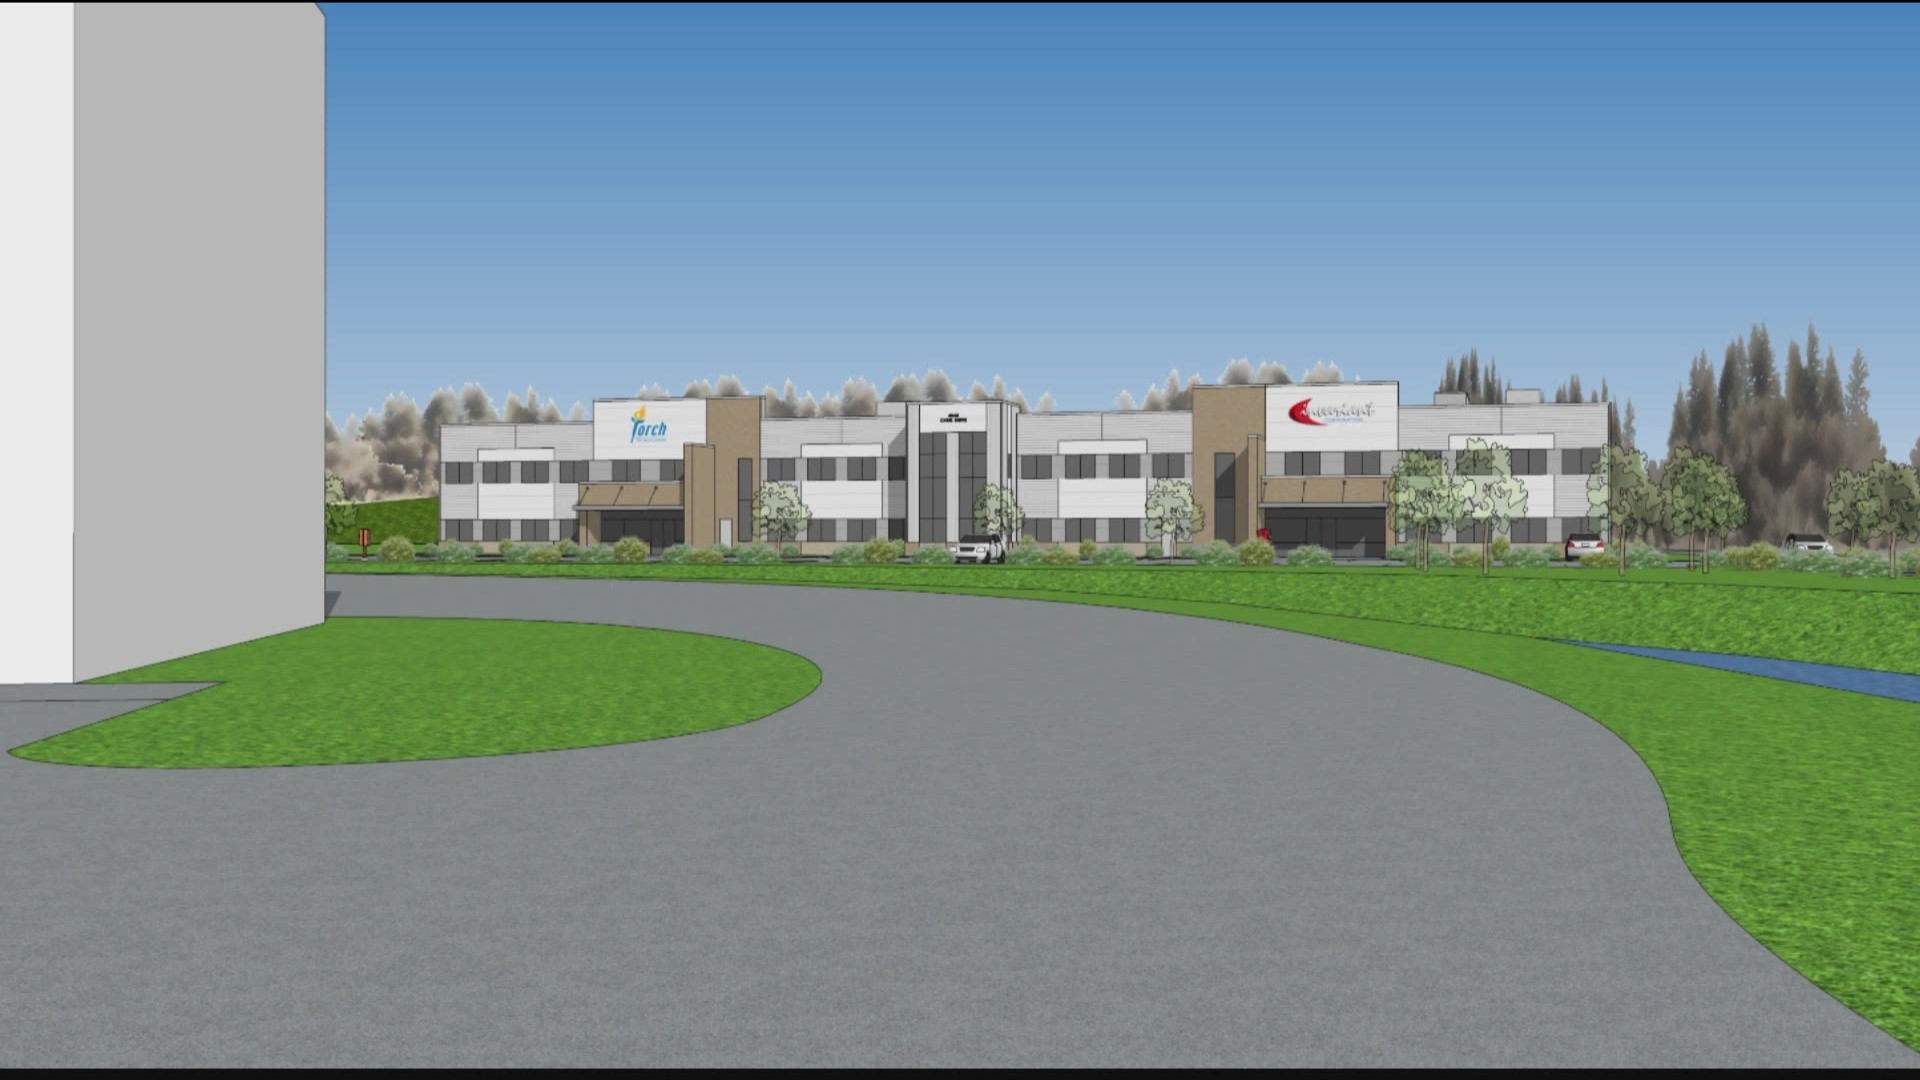 A new mixed-use facility will be making its way to South Huntsville The 92,000 square foot building will have research and development labs and office space.